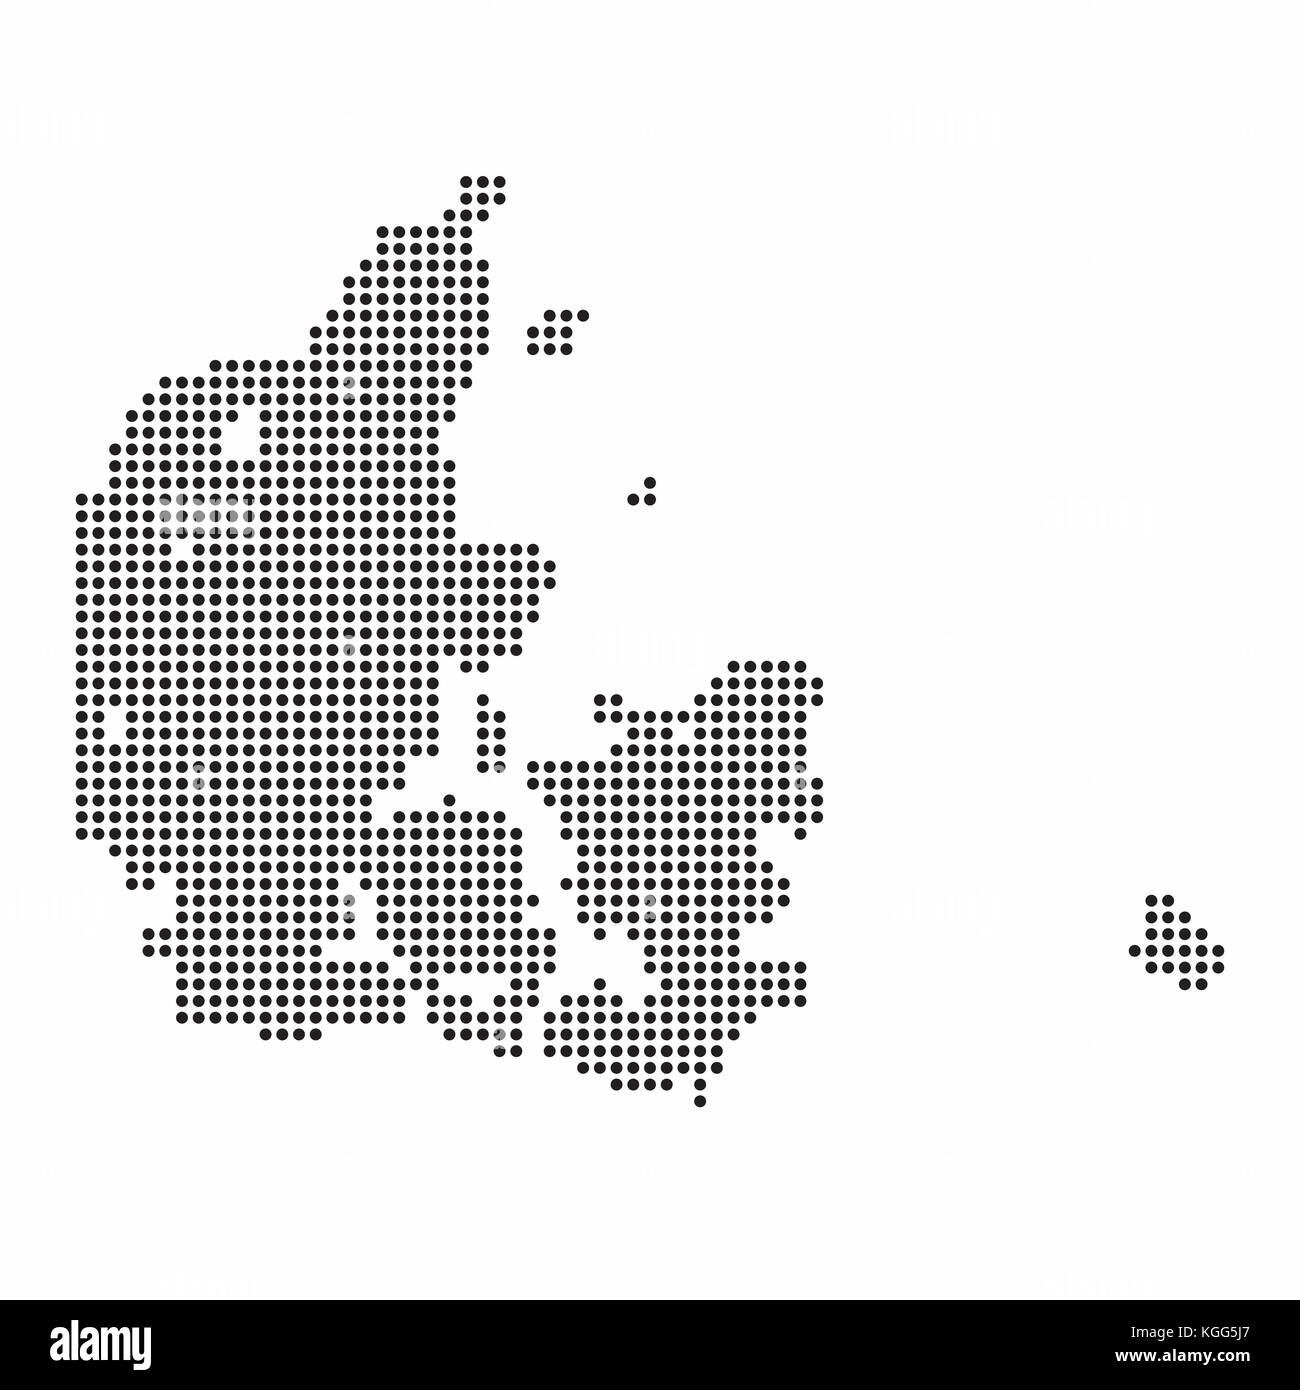 Denmark country map made from abstract halftone dot pattern Stock Vector